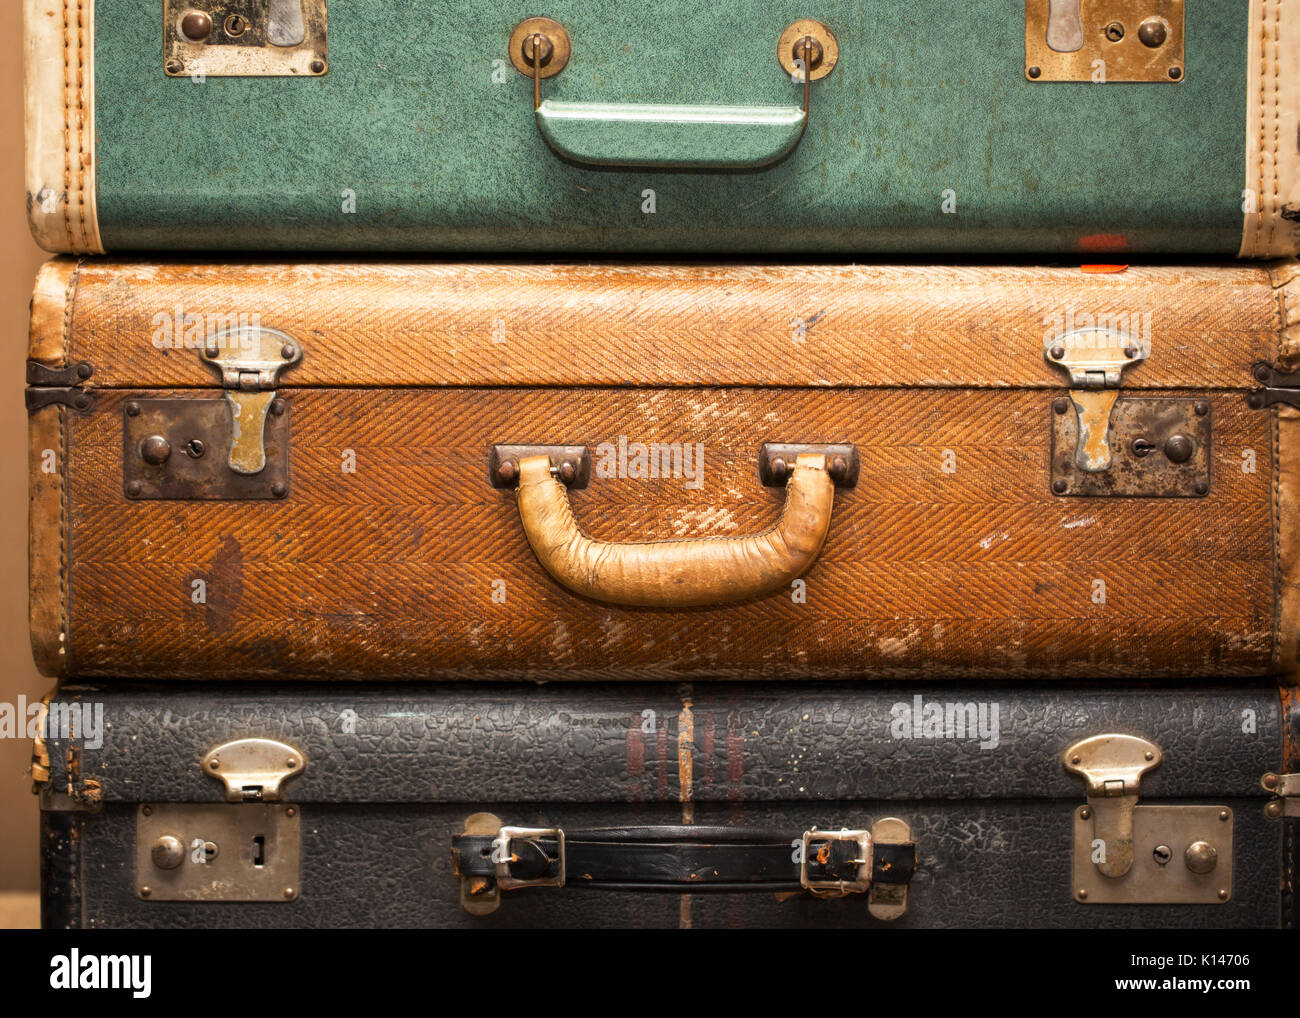 Vintage suitcases stacked together Stock Photo